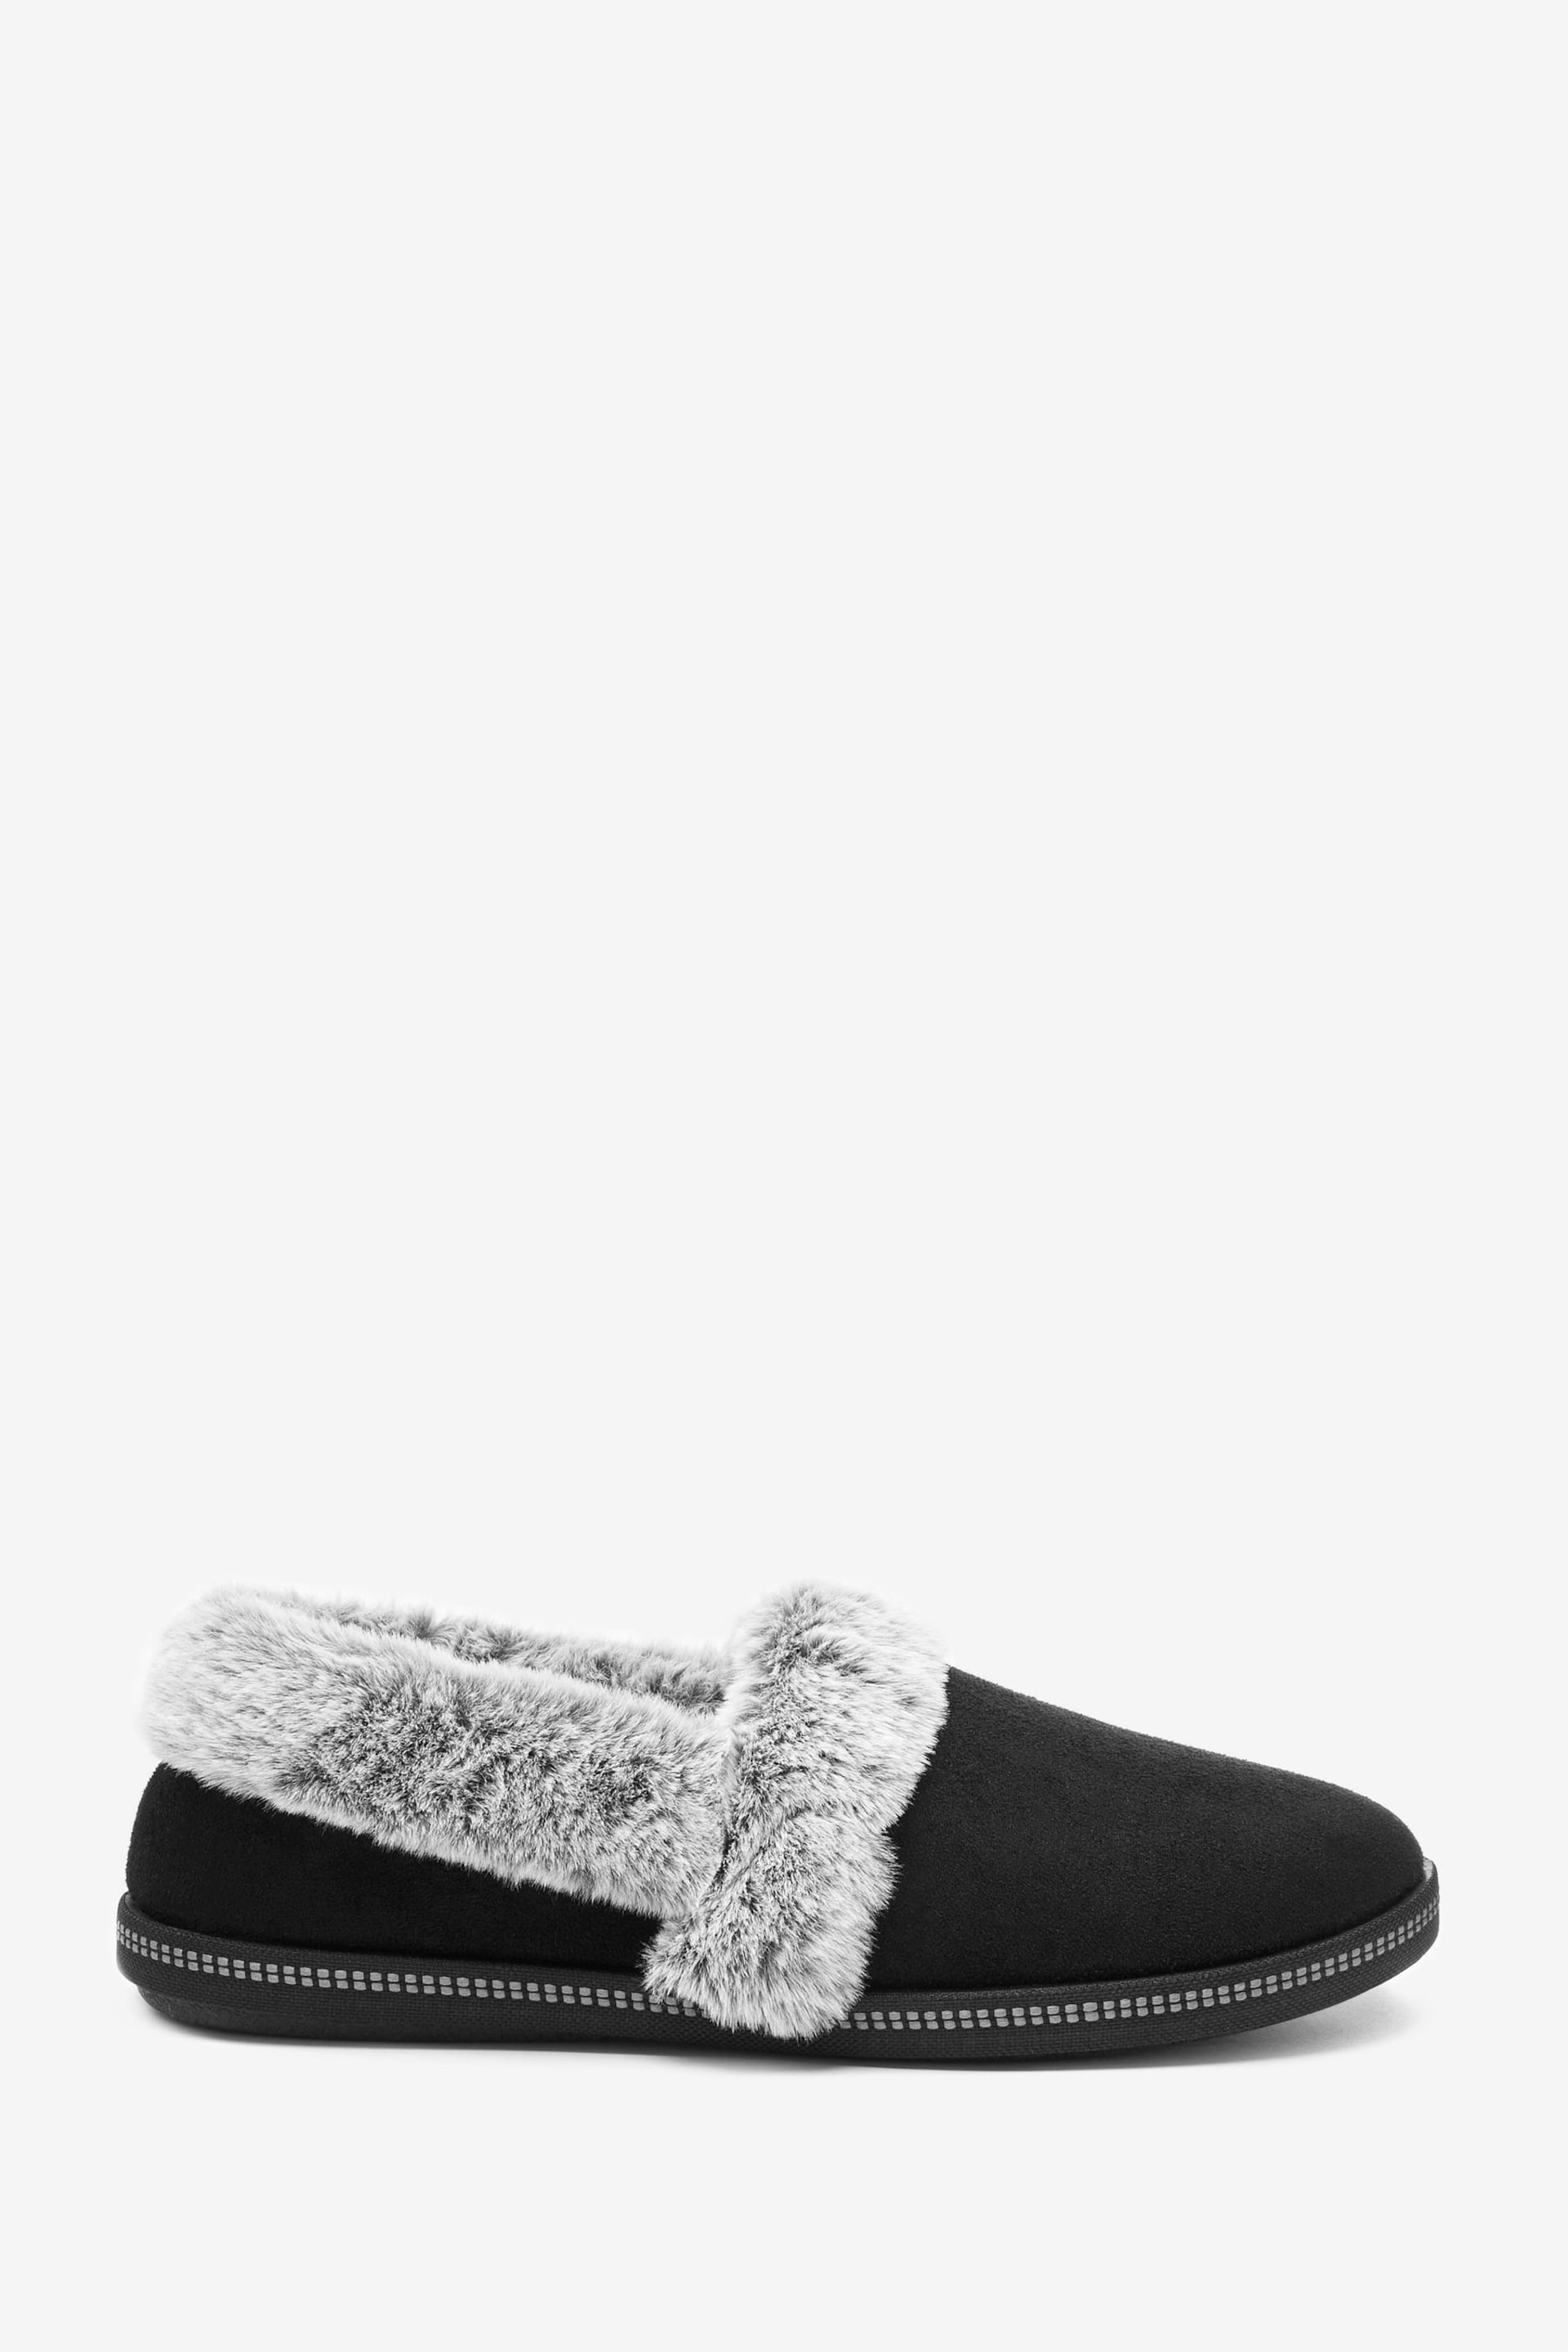 Skechers Black Cosy Campfire Team Toasty Womens Slippers - Image 1 of 4